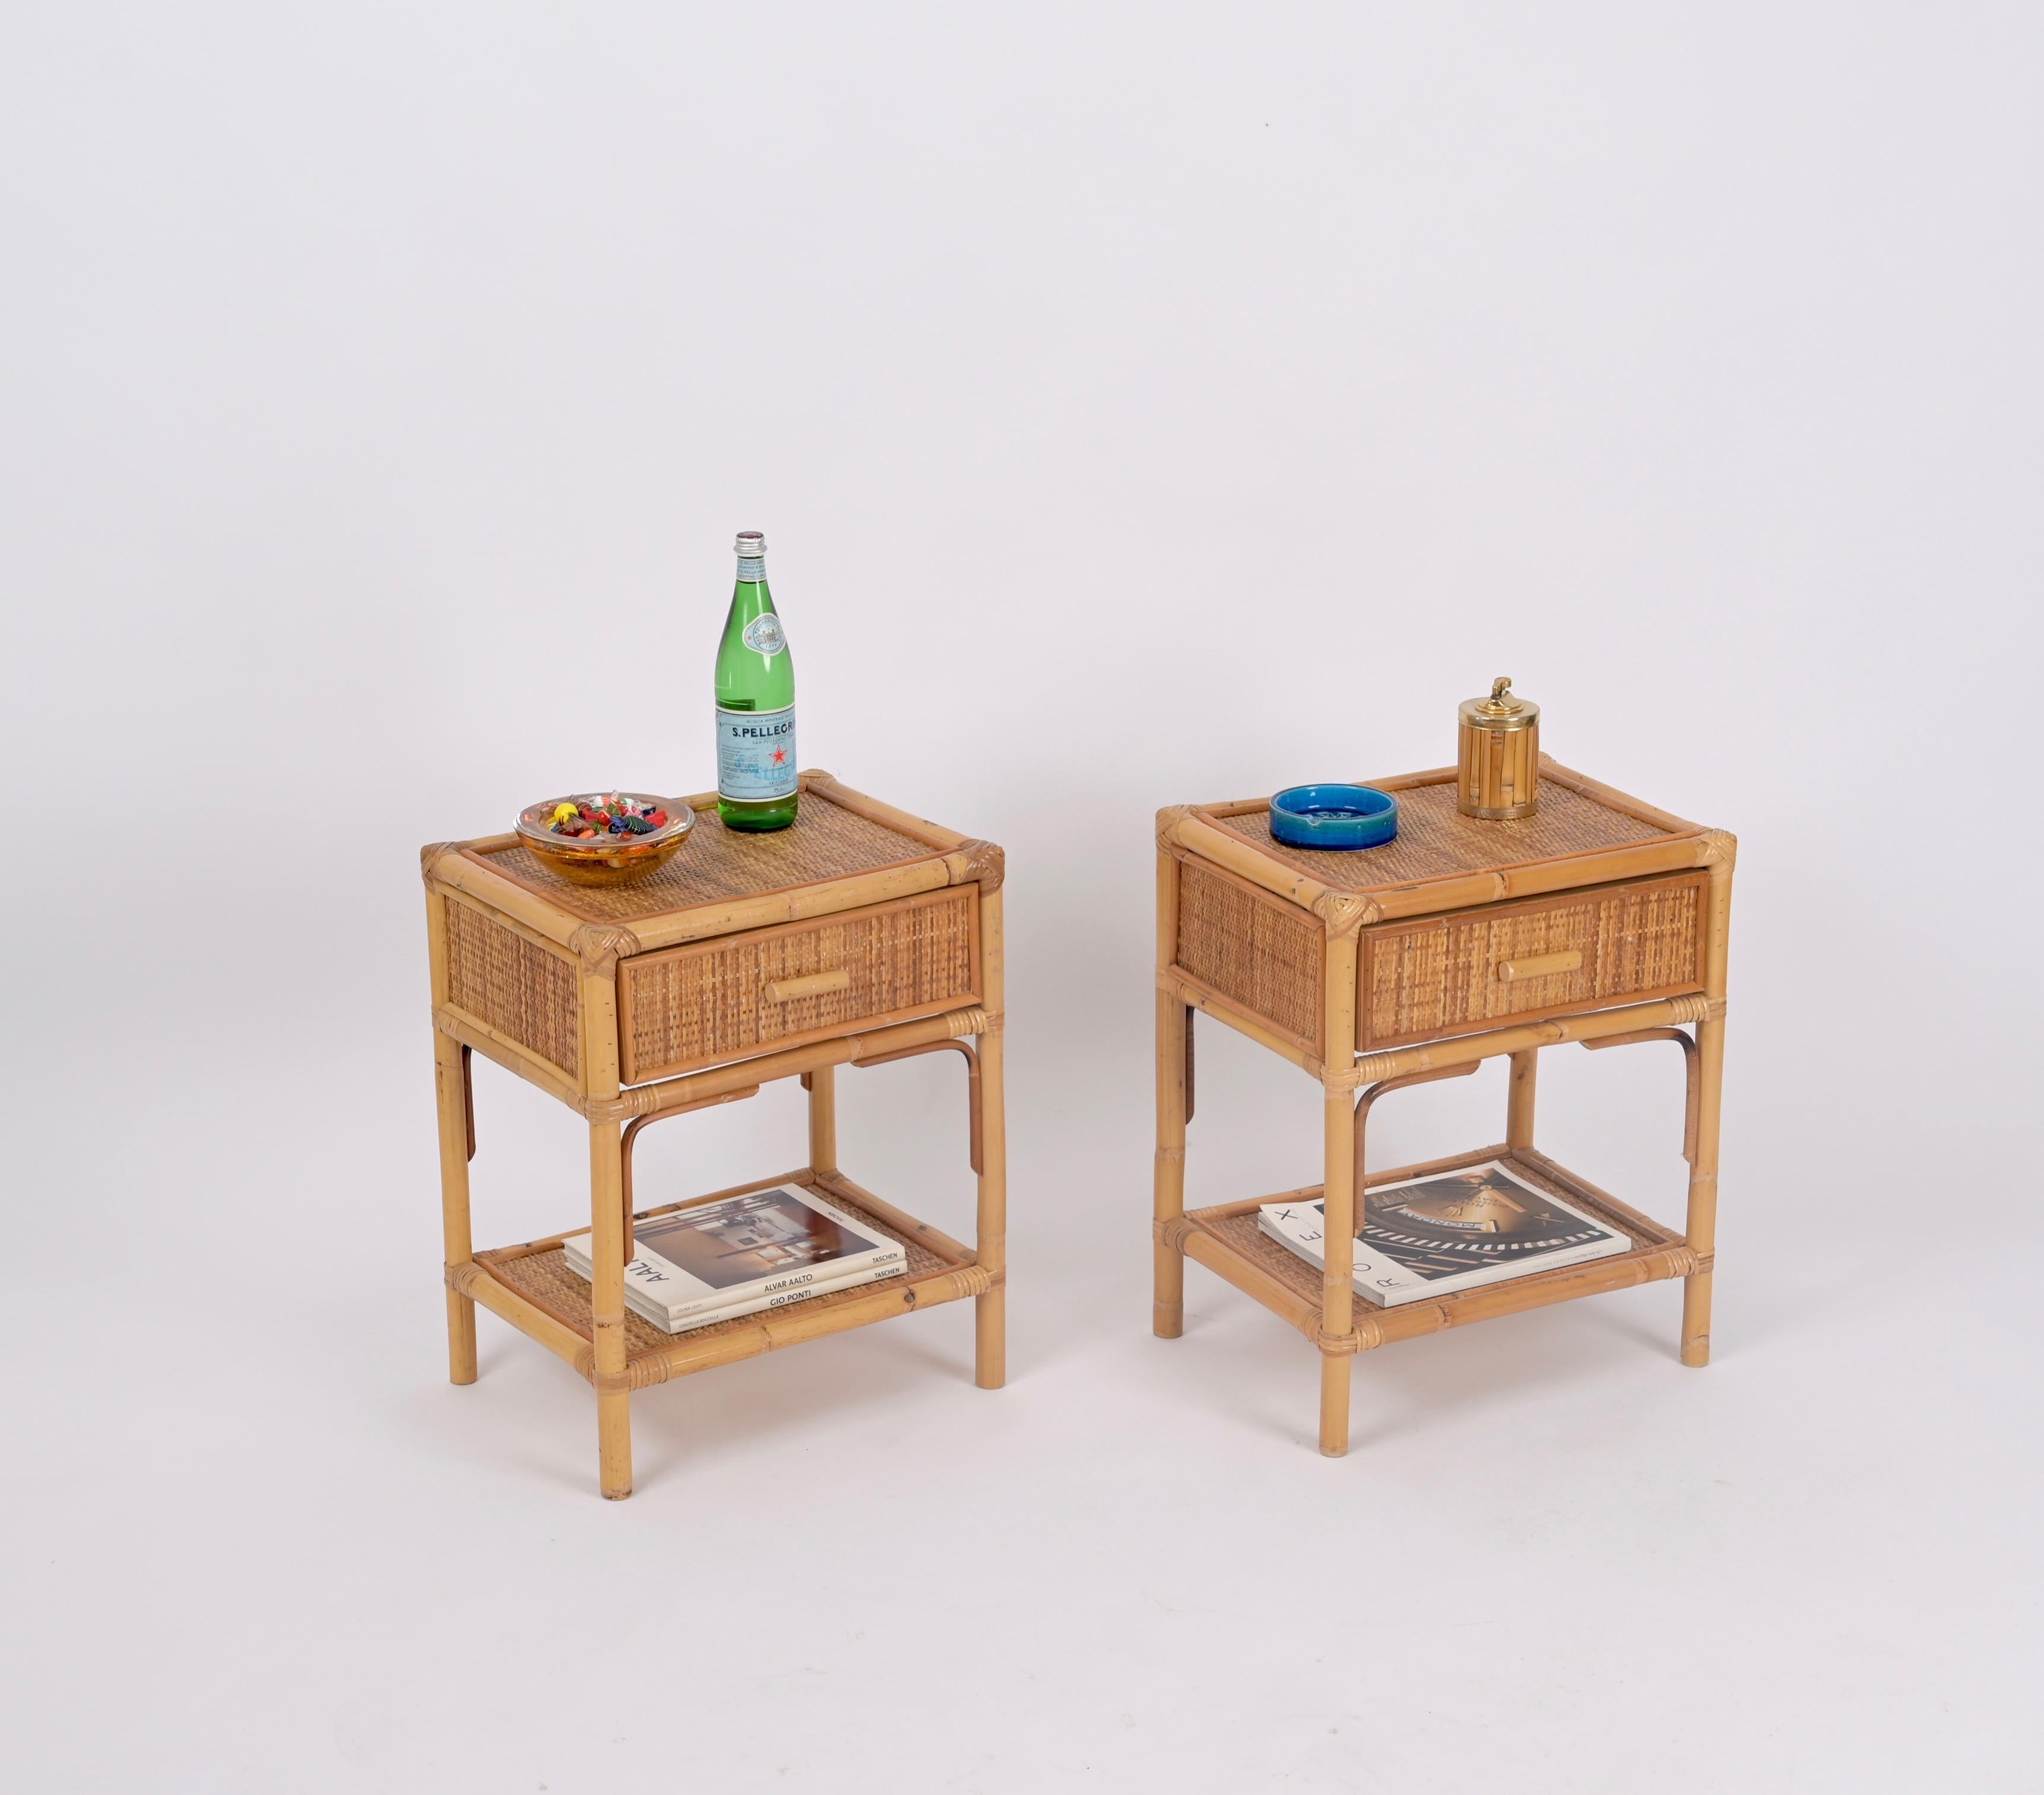 Fantastic pair of Mid-Century bedside tables in bamboo, hand-woven wicker and rattan. These lovely bedside tables were designed in Italy in the 1970s.

These gorgeous and sturdy nightstands are entirely made of bamboo canes and enriched all around